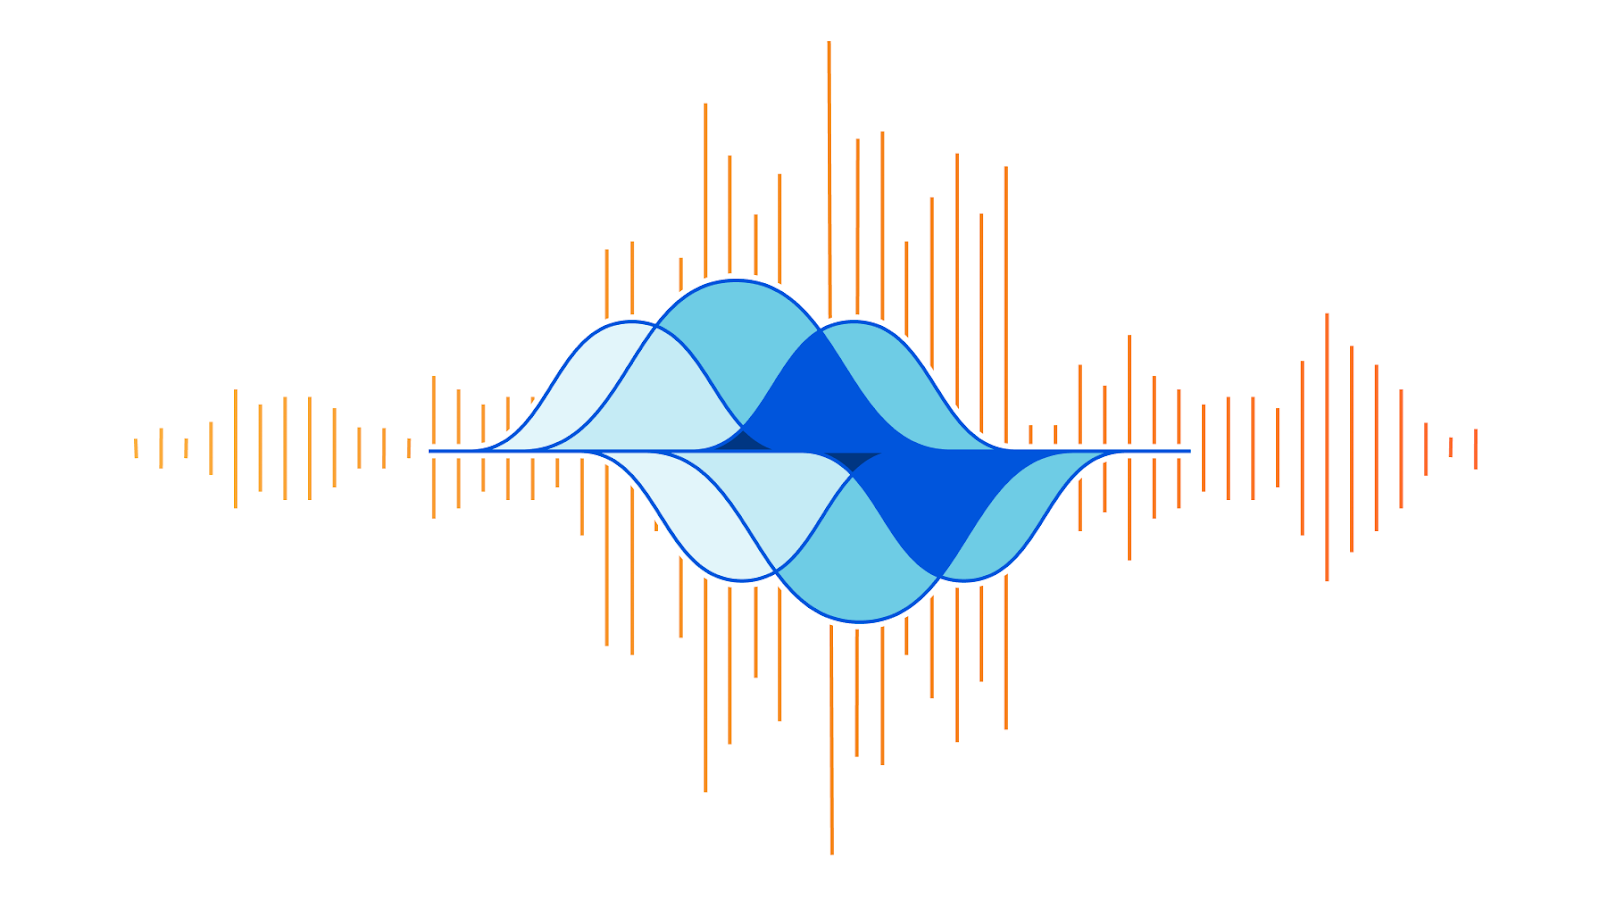 Beat - An Acoustics Inspired DDoS Attack